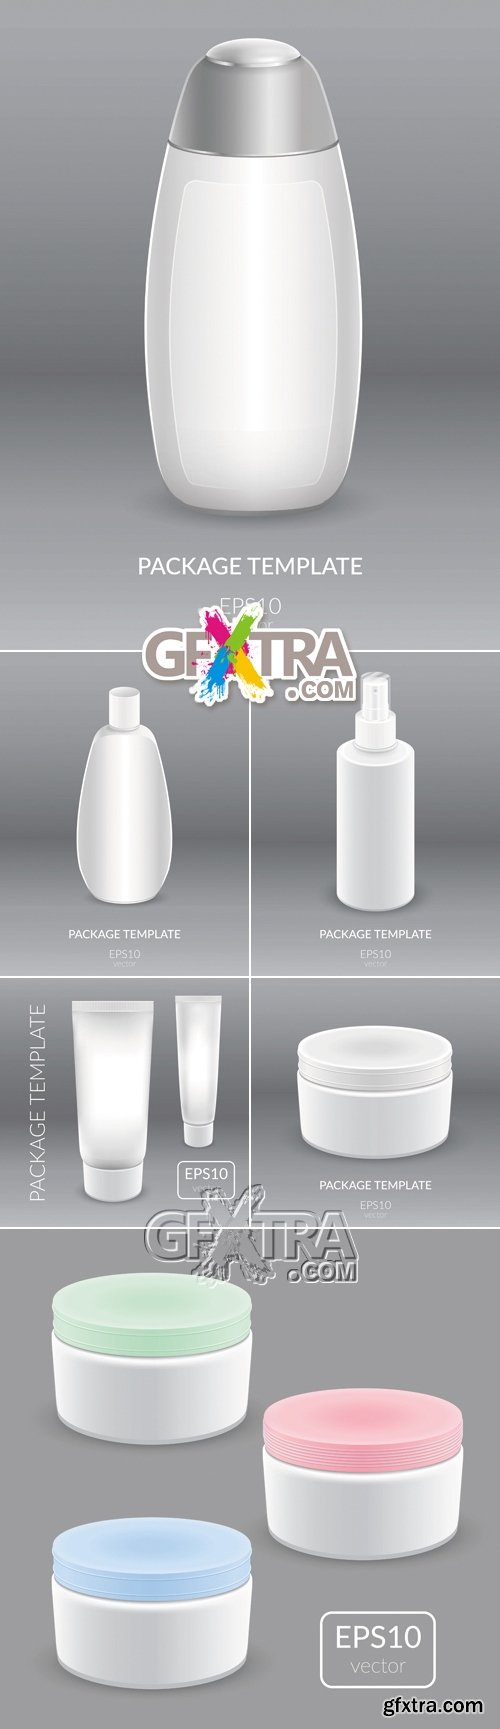 Package Templates Vector